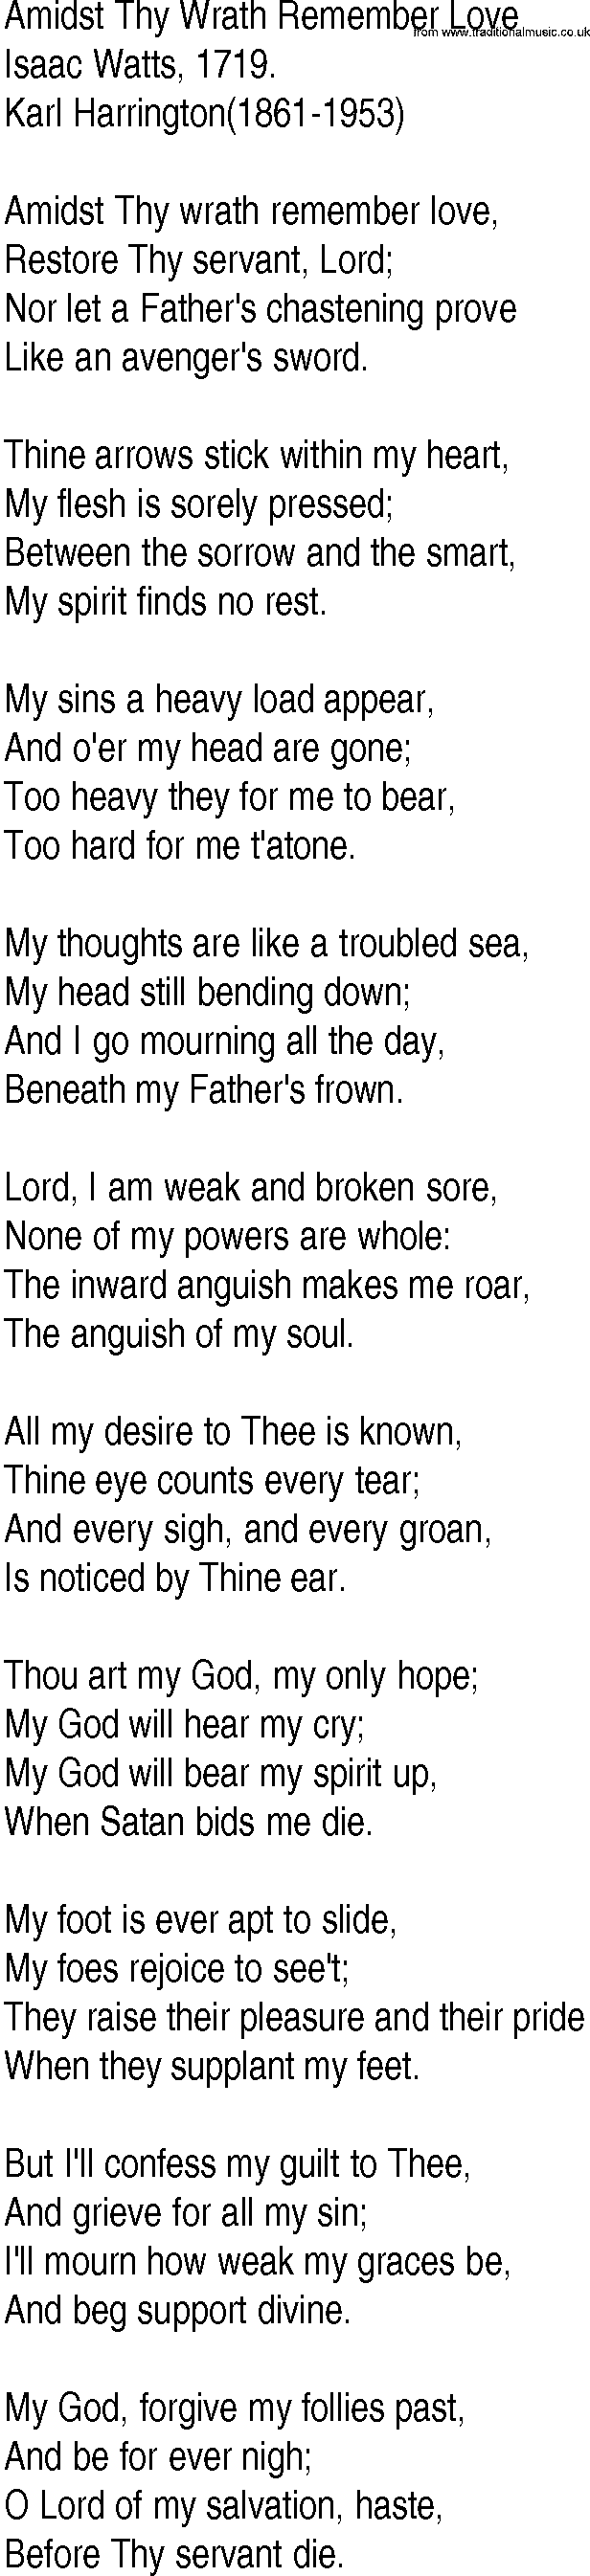 Hymn and Gospel Song: Amidst Thy Wrath Remember Love by Isaac Watts lyrics